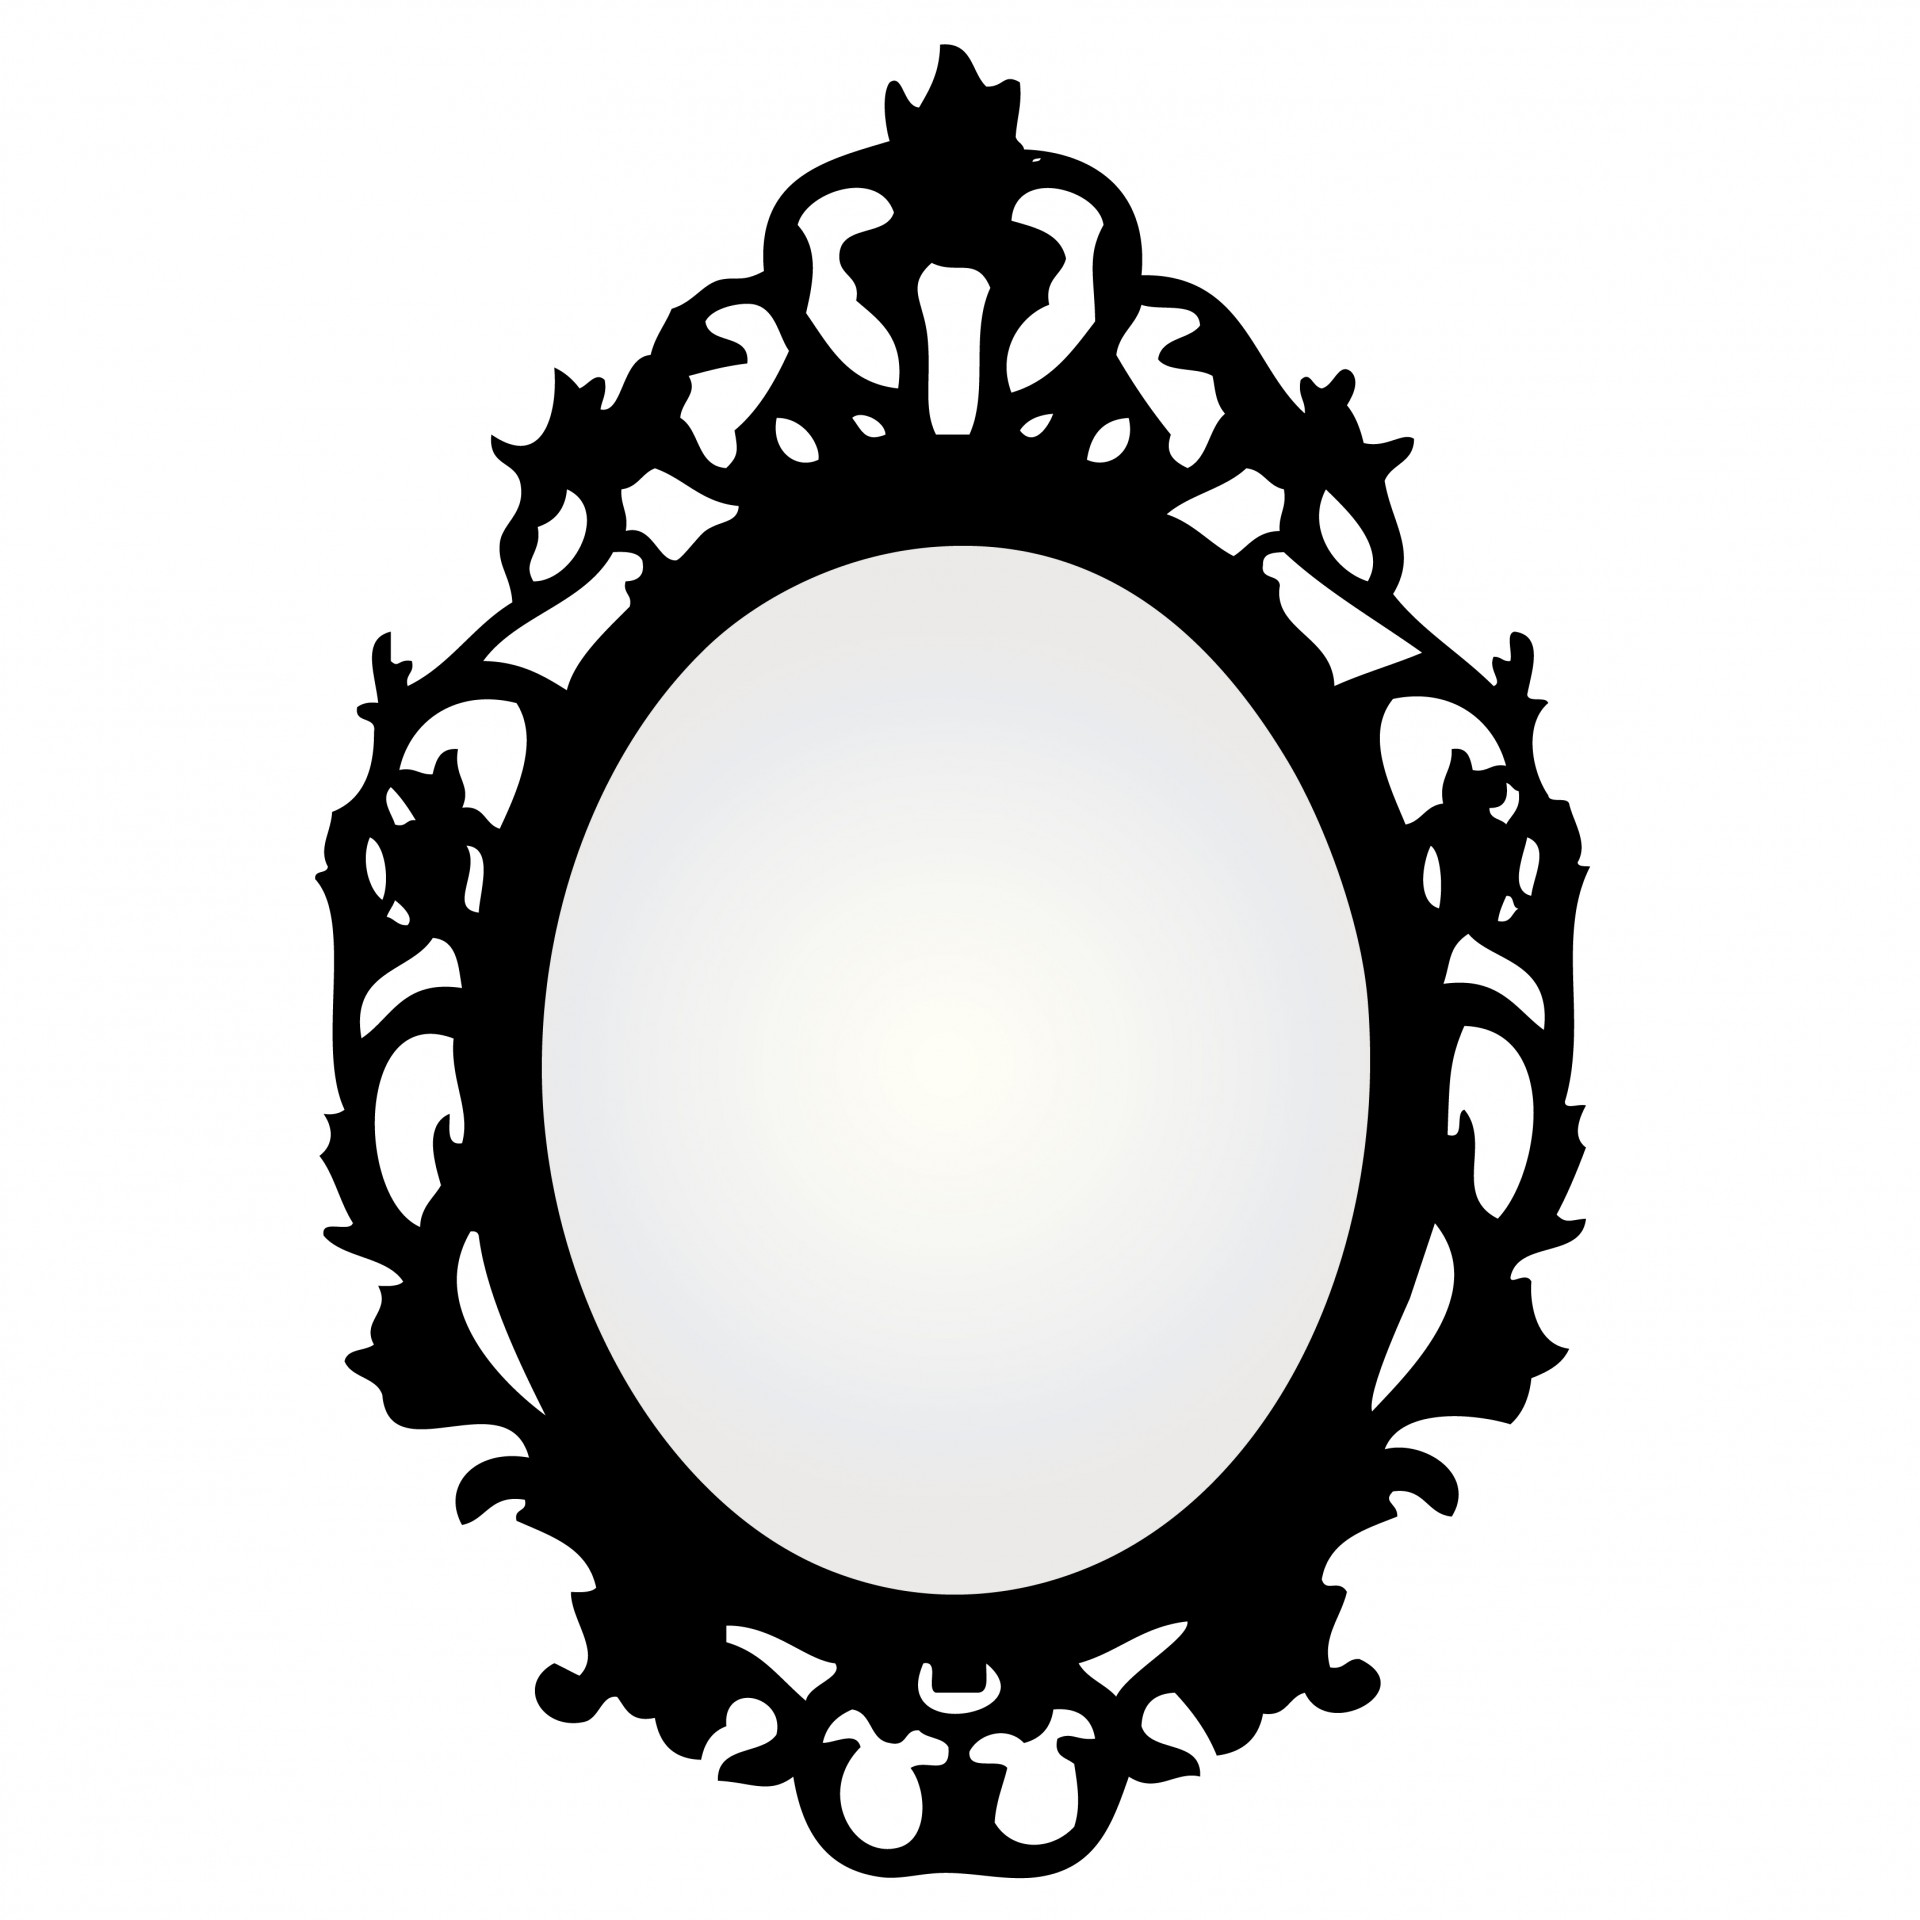 Mirror with ornate black frame clipart for scrapbooking